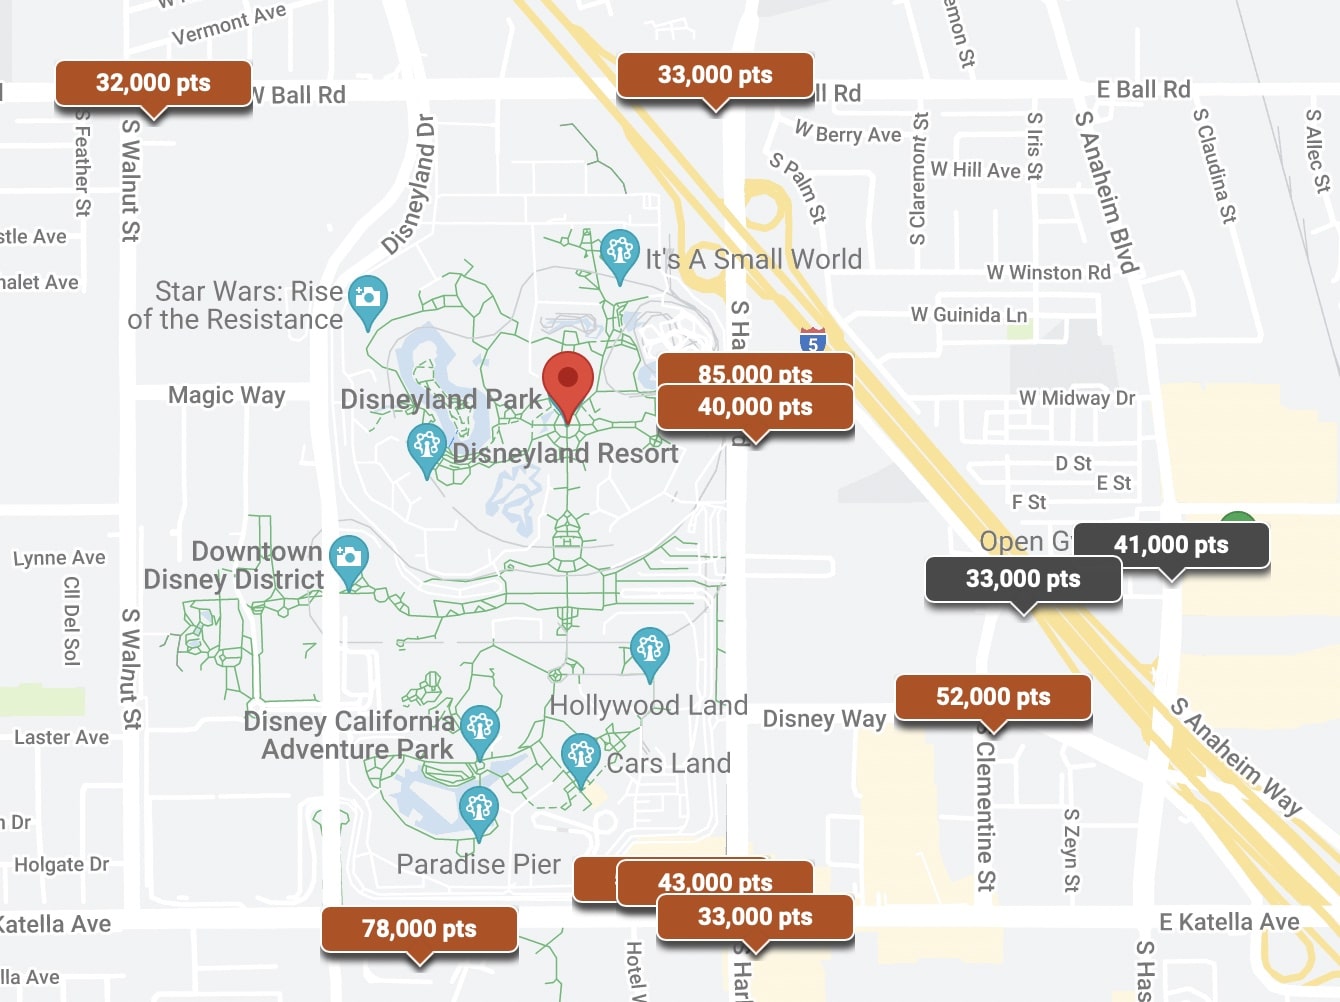 map of marriott hotel options with pricing near disneyland